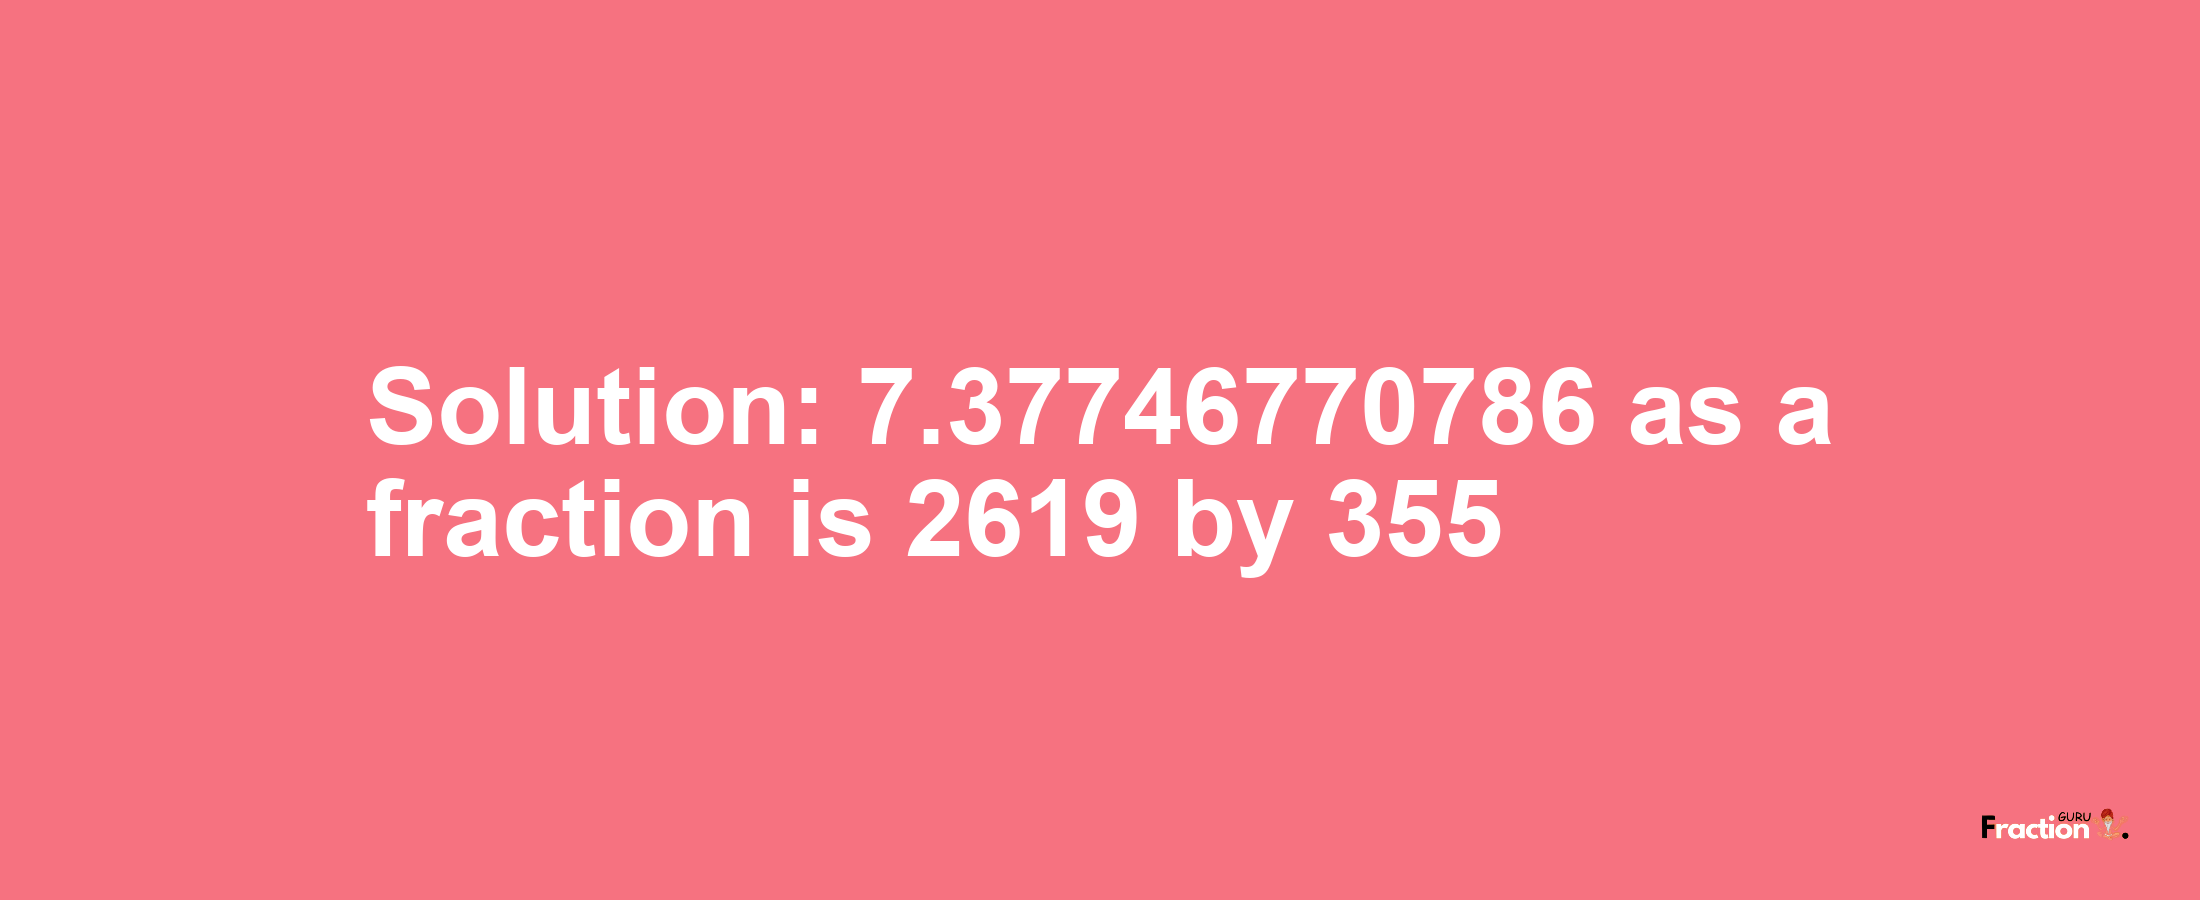 Solution:7.37746770786 as a fraction is 2619/355